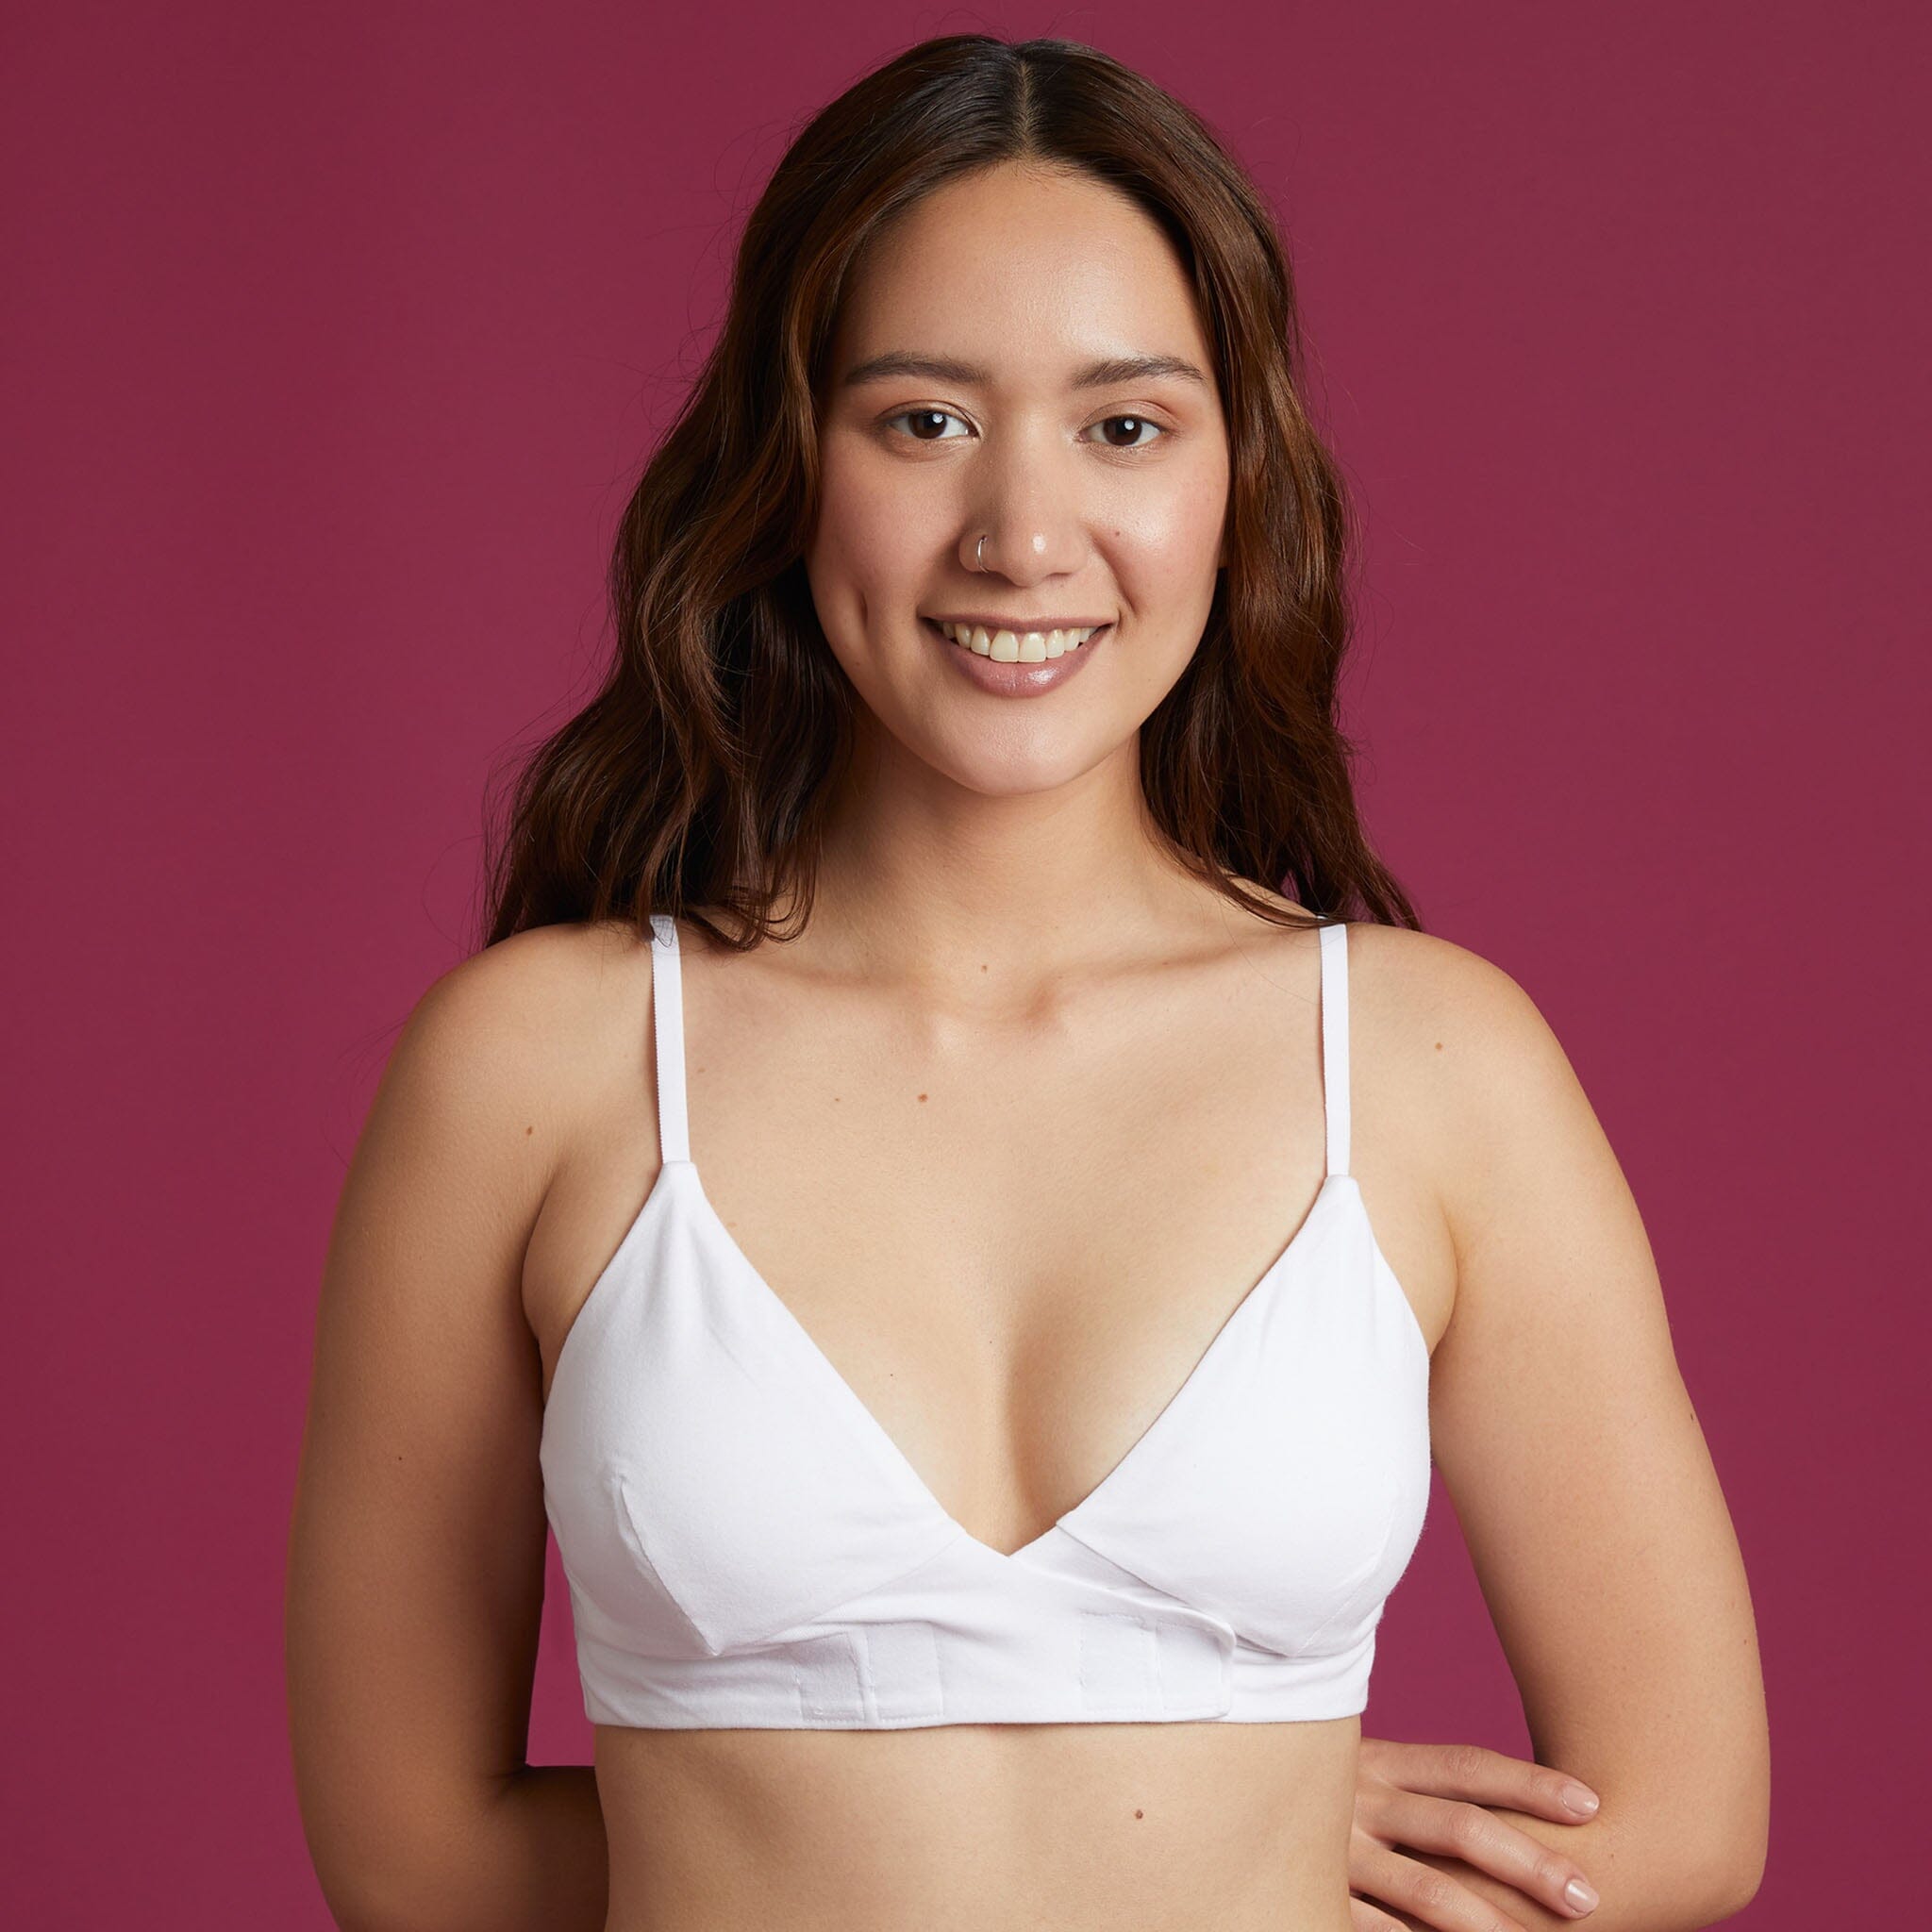 Front Fastening Bra with VELCRO� Brand Fasteners 